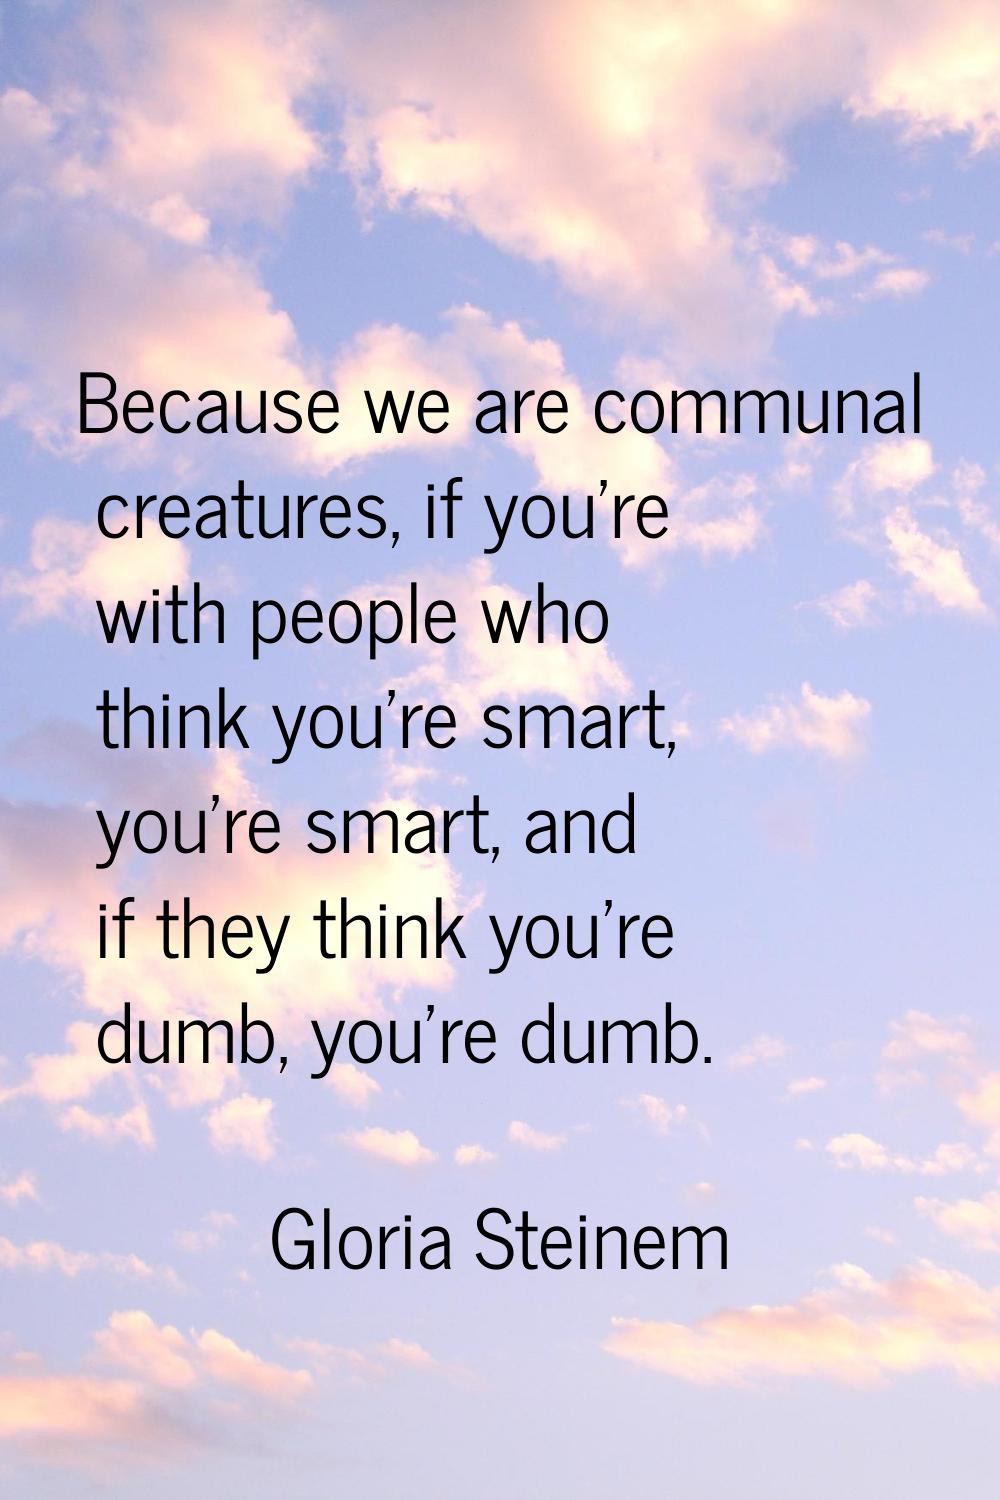 Because we are communal creatures, if you're with people who think you're smart, you're smart, and 